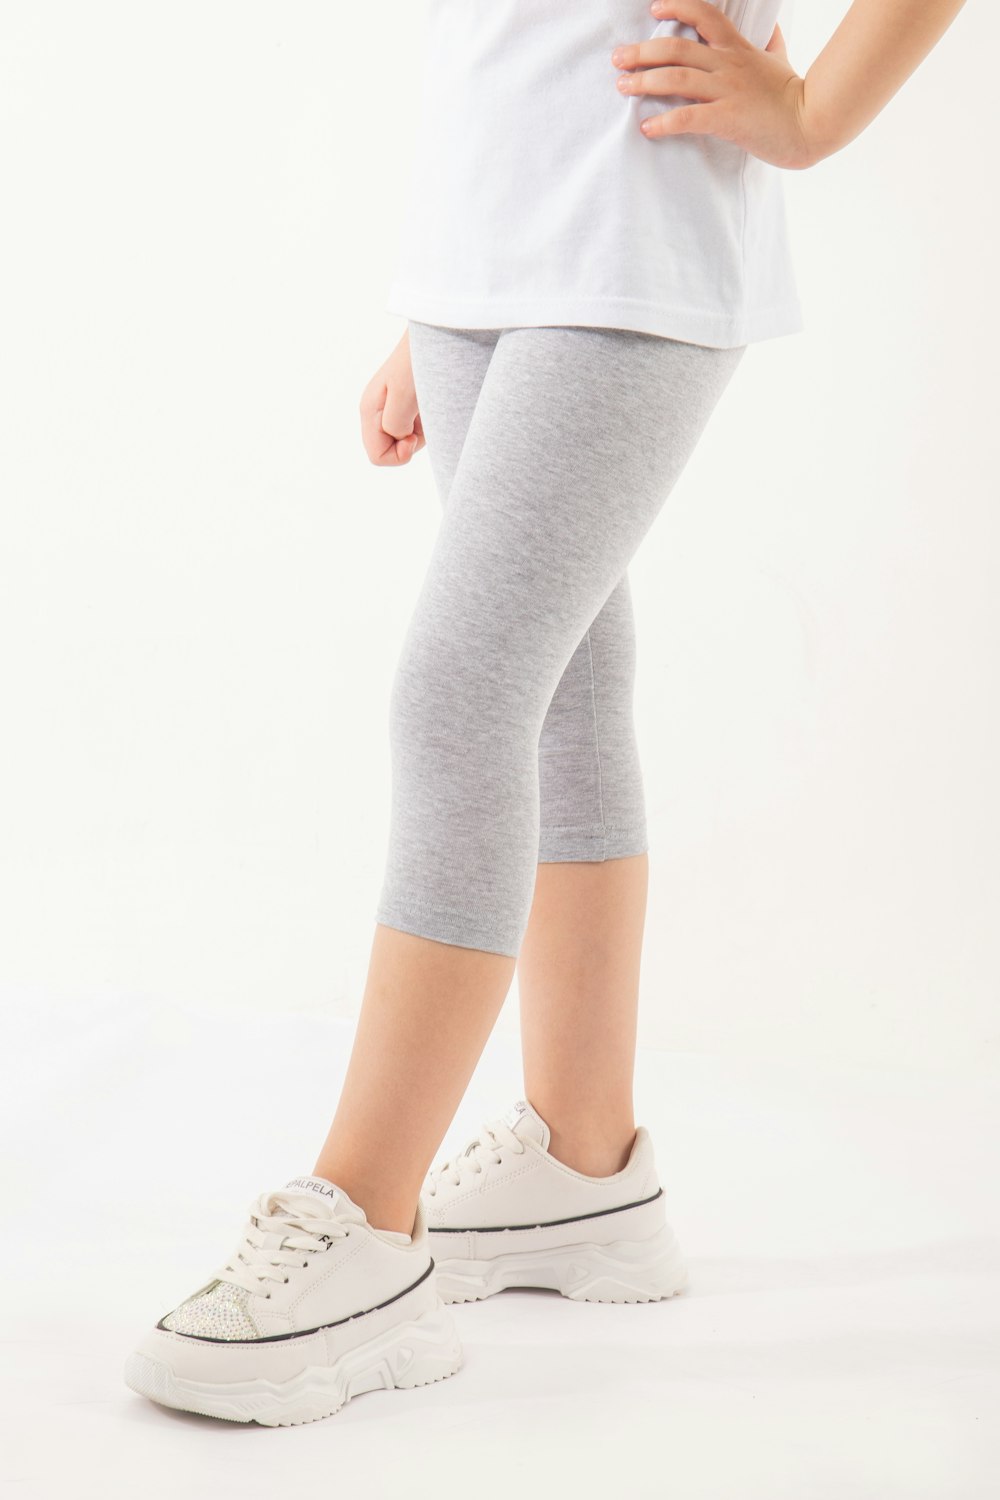 a little girl in a white shirt and grey leggings